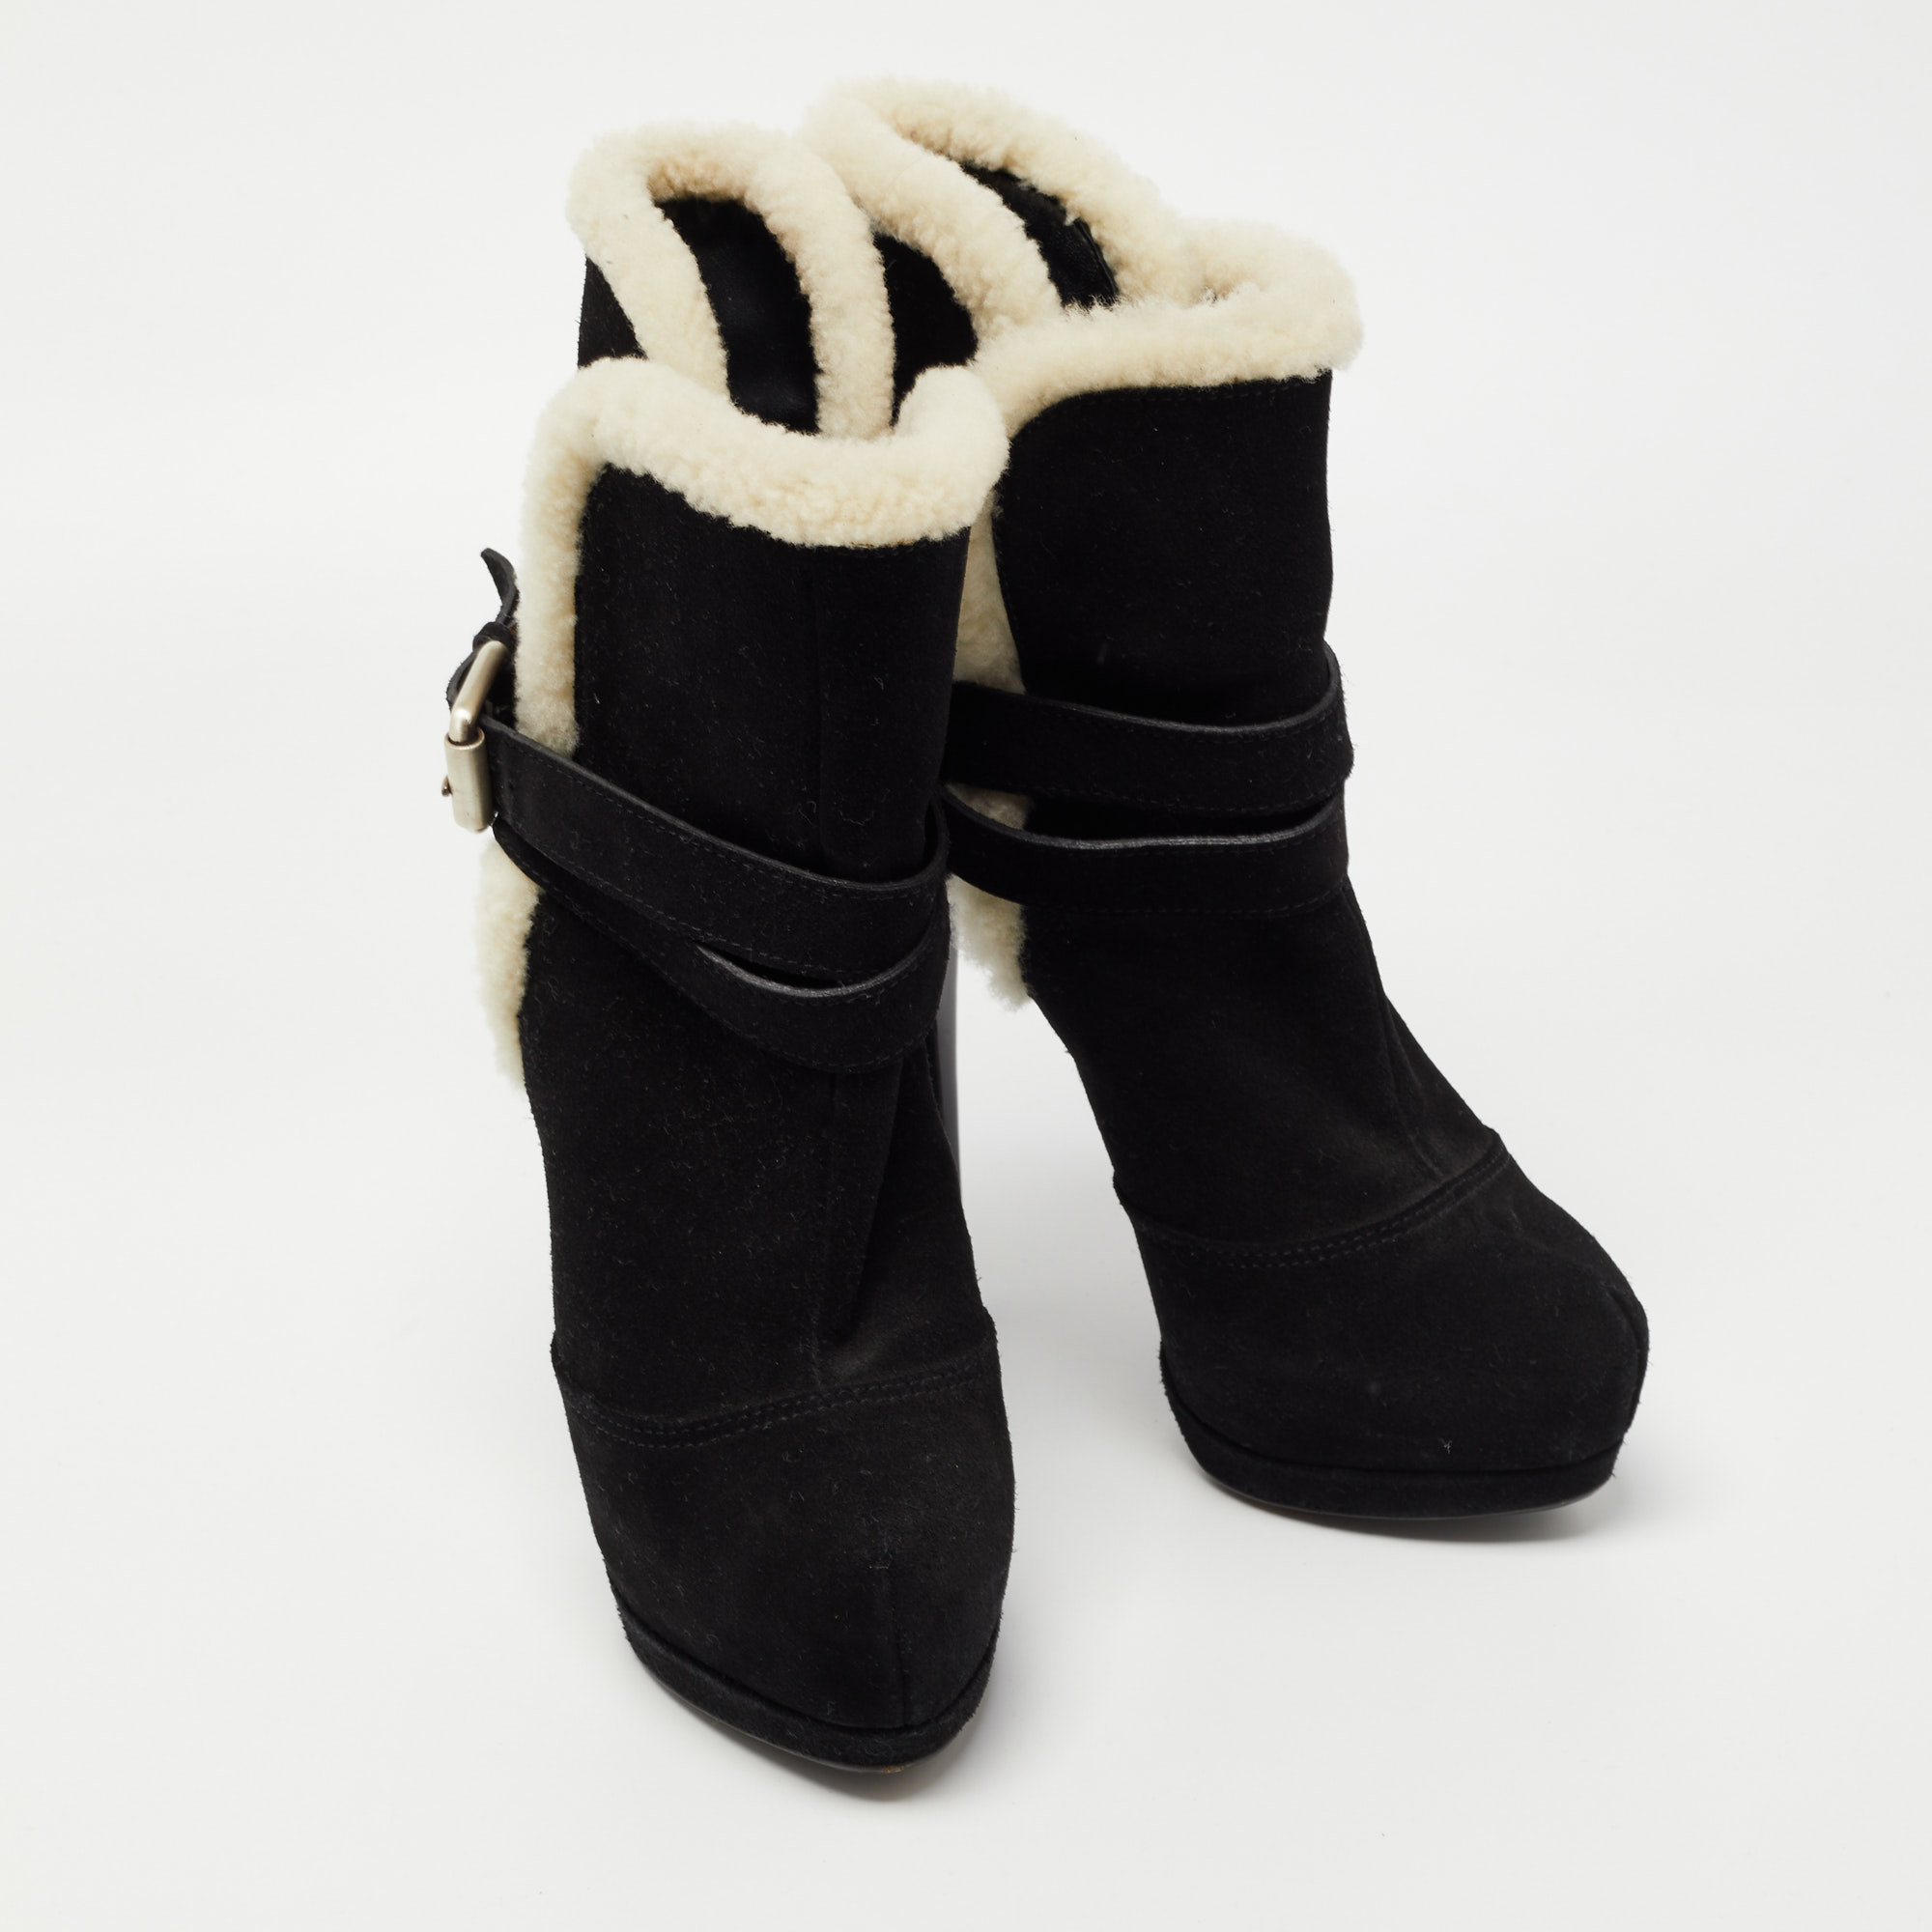 Giuseppe Zanotti Black Suede And Fur Ankle Boots Size 37